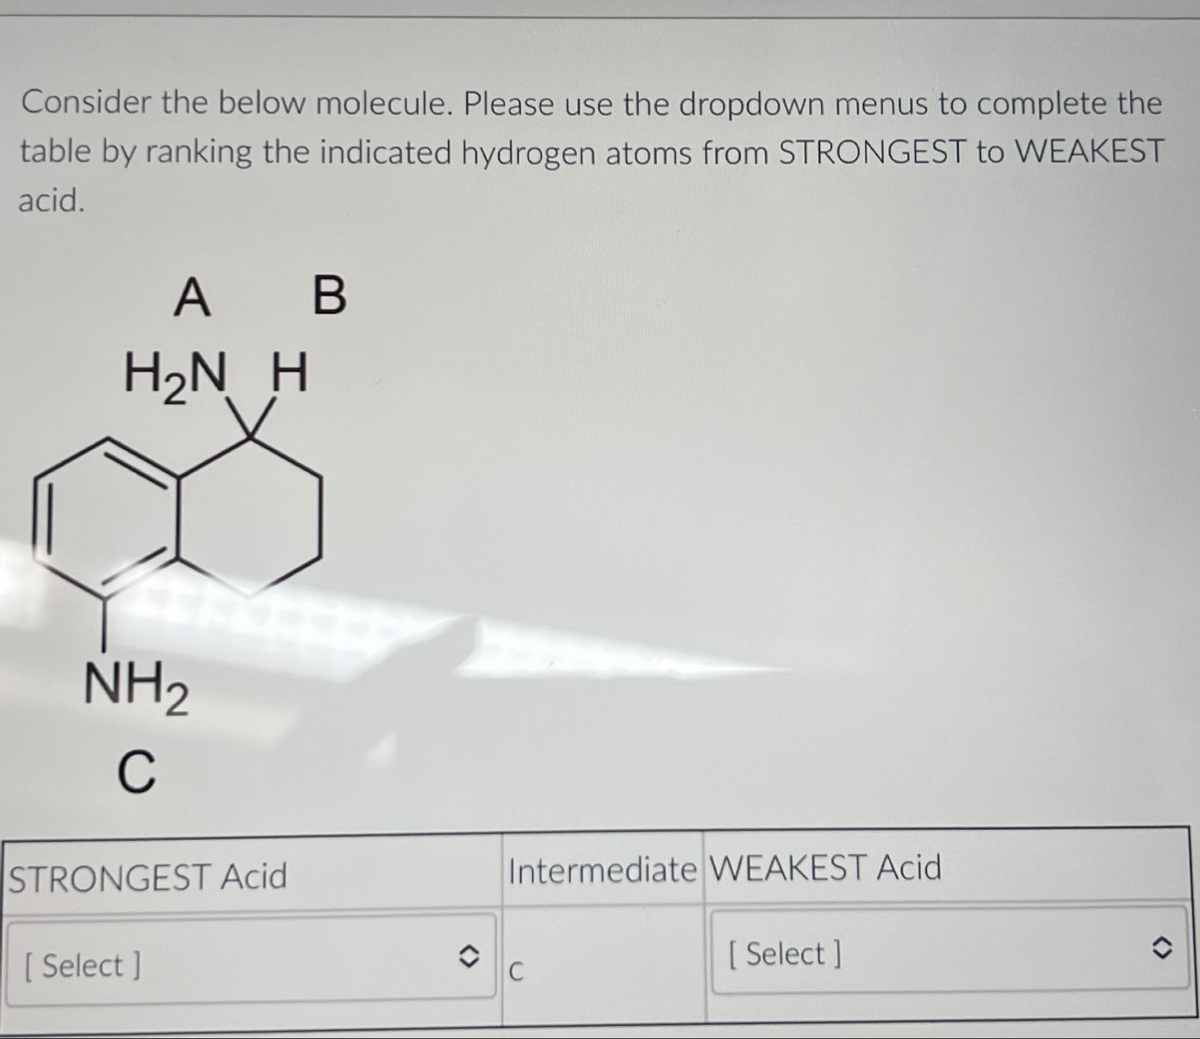 Consider the below molecule. Please use the dropdown menus to complete the
table by ranking the indicated hydrogen atoms from STRONGEST to WEAKEST
acid.
A B
H₂N H
NH₂
C
STRONGEST Acid
[ Select]
O
Intermediate WEAKEST Acid
C
[Select]
û